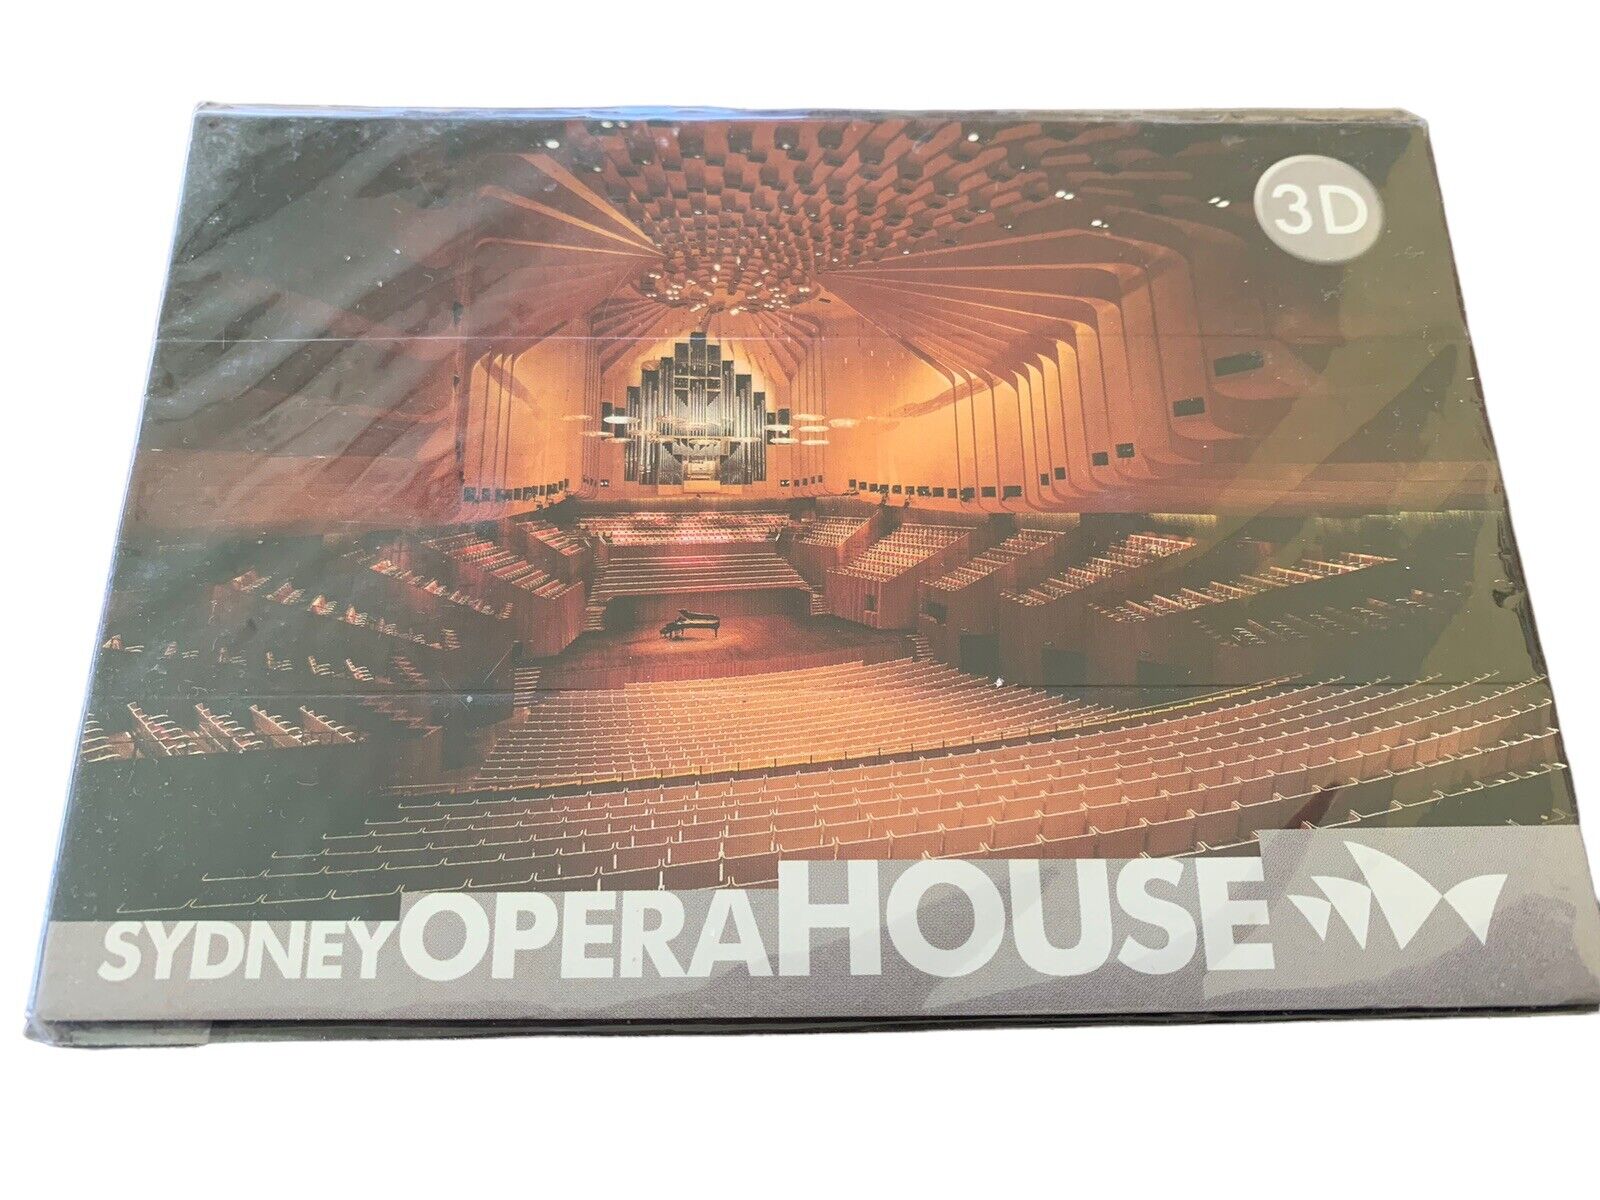 The Amazing Card Stereo Viewer Sydney Opera House Rare New In Package